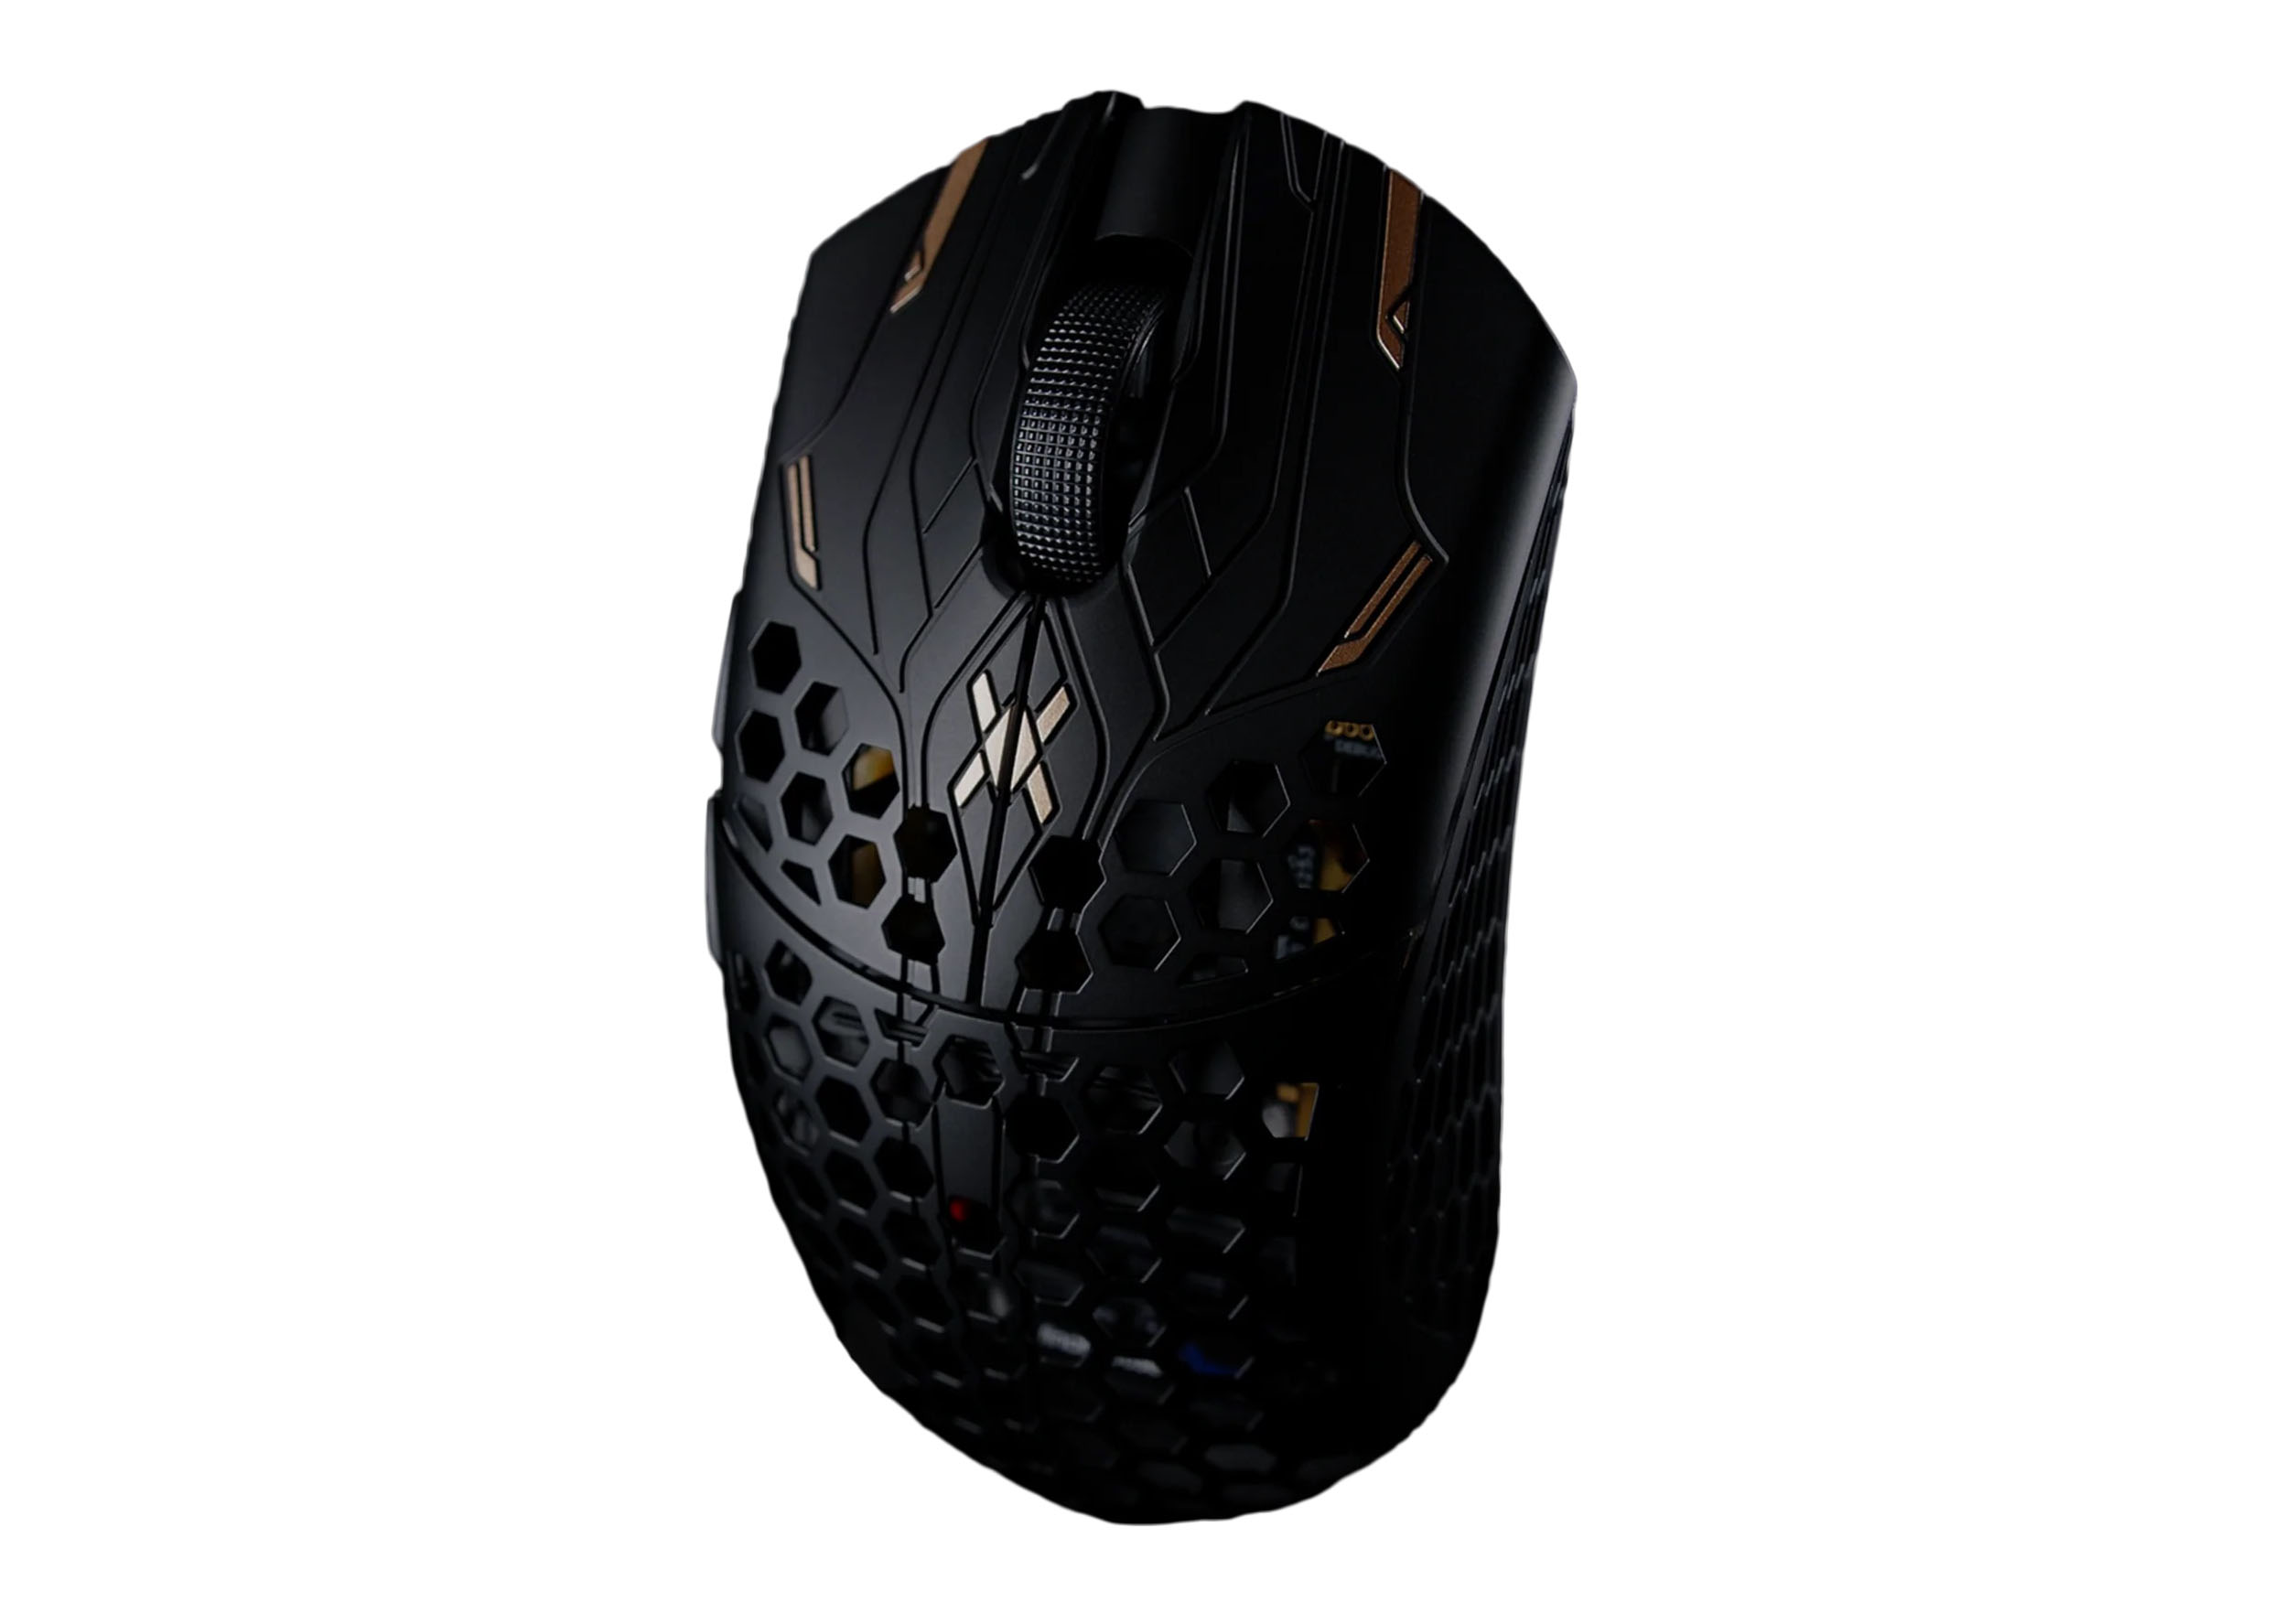 Finalmouse UltralightX Guadian Tiger(L)スマホ・タブレット・パソコン